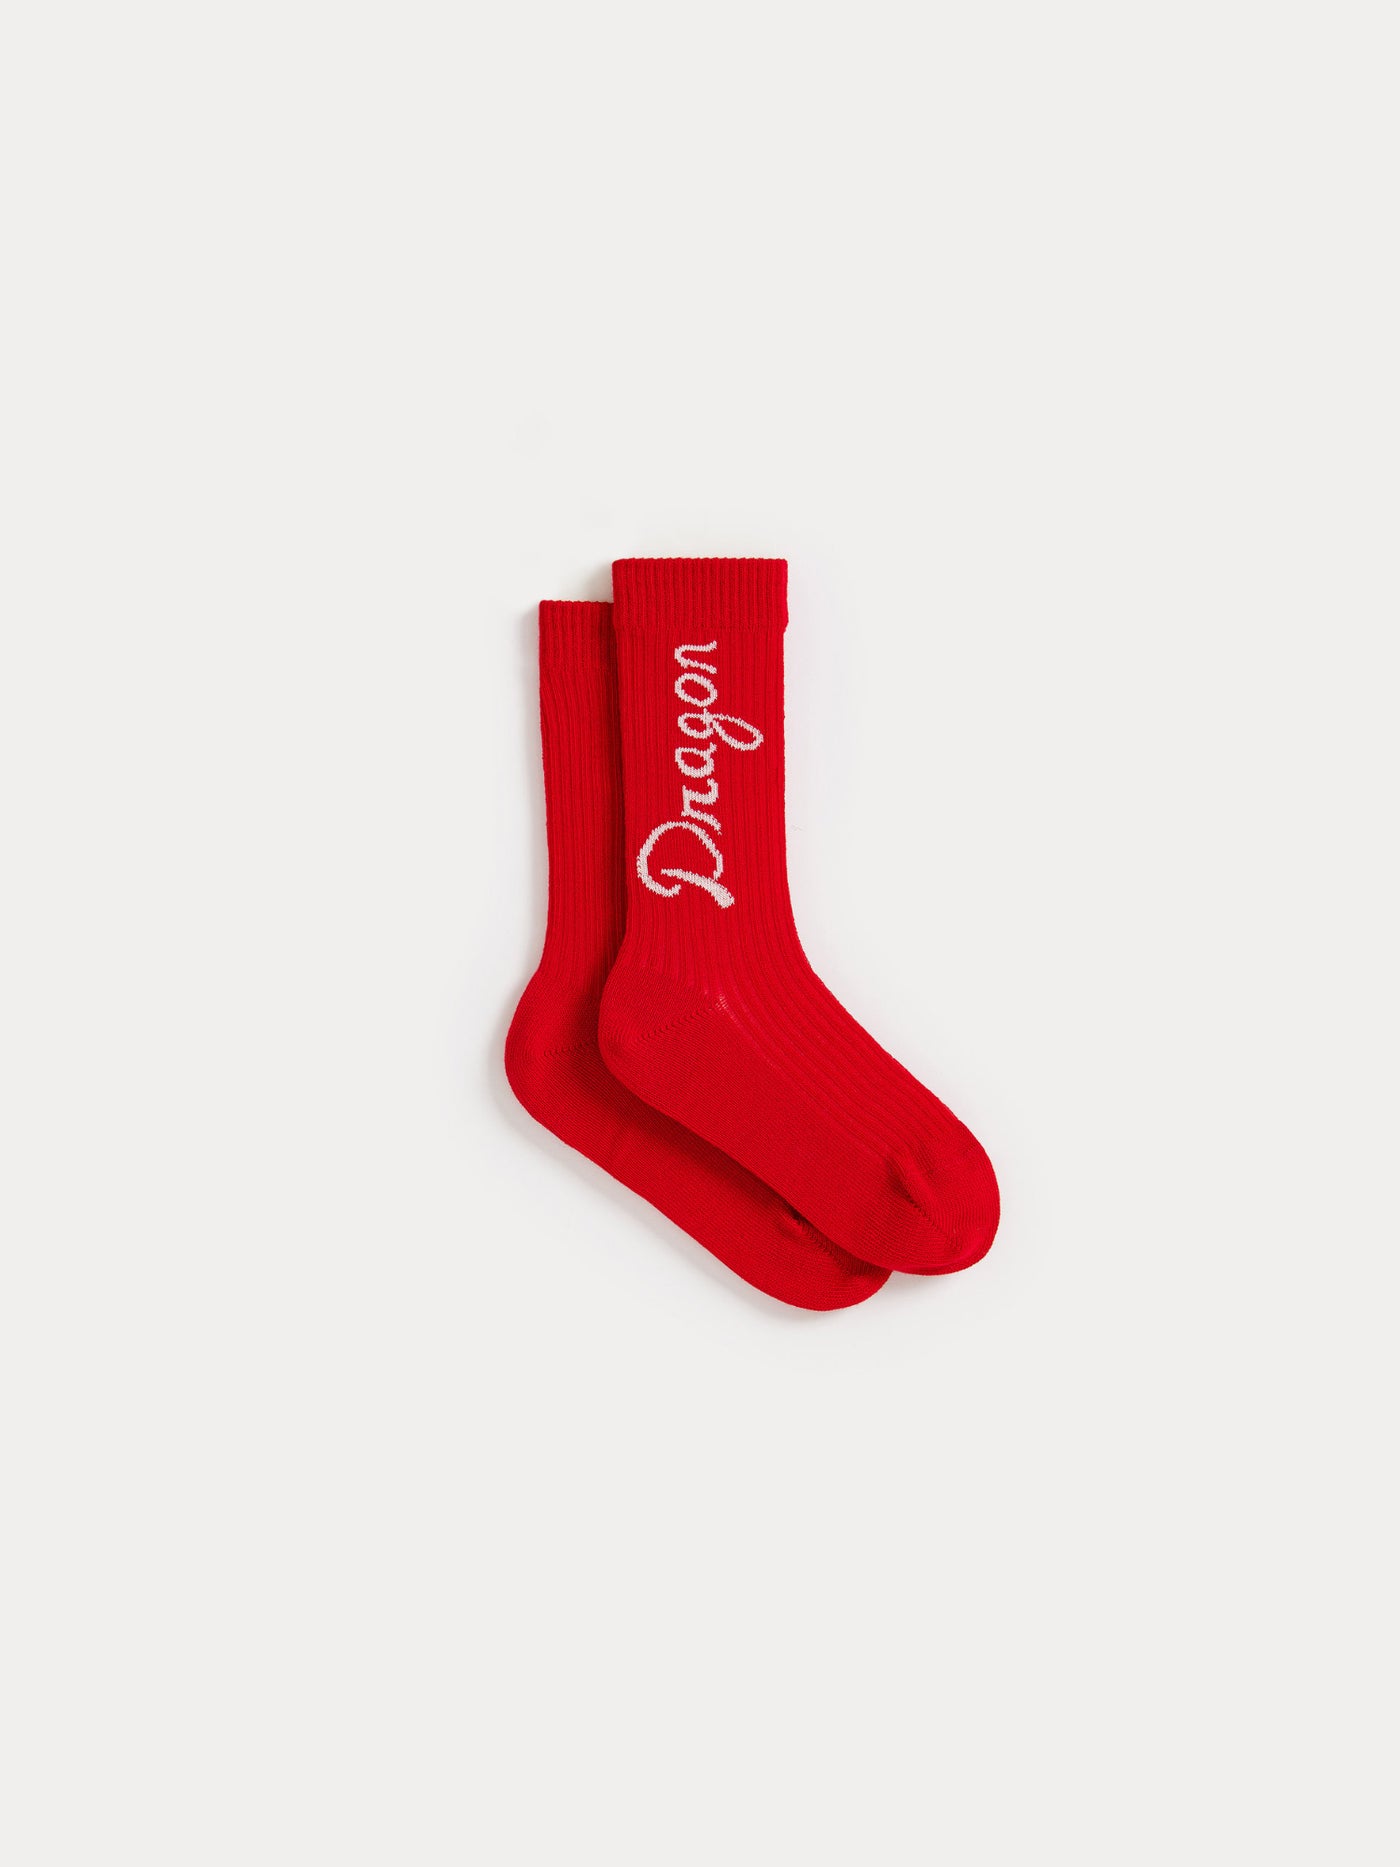 Chaussettes Dune rubis